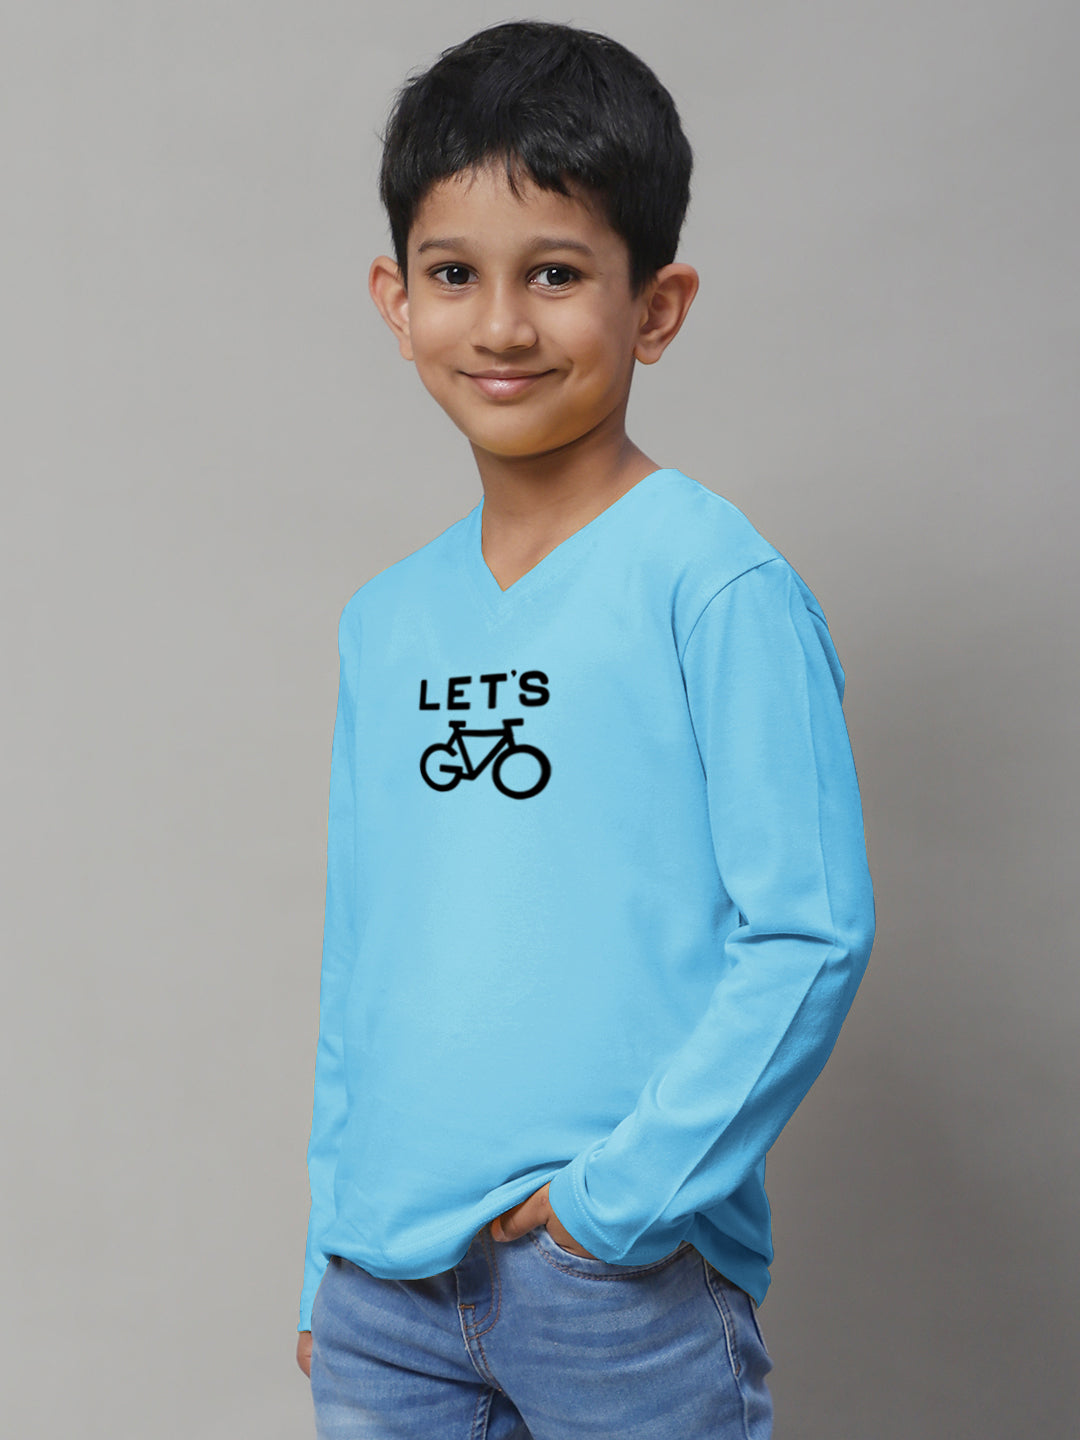 Boys Lets Full Sleeves Printed T-Shirt - Friskers